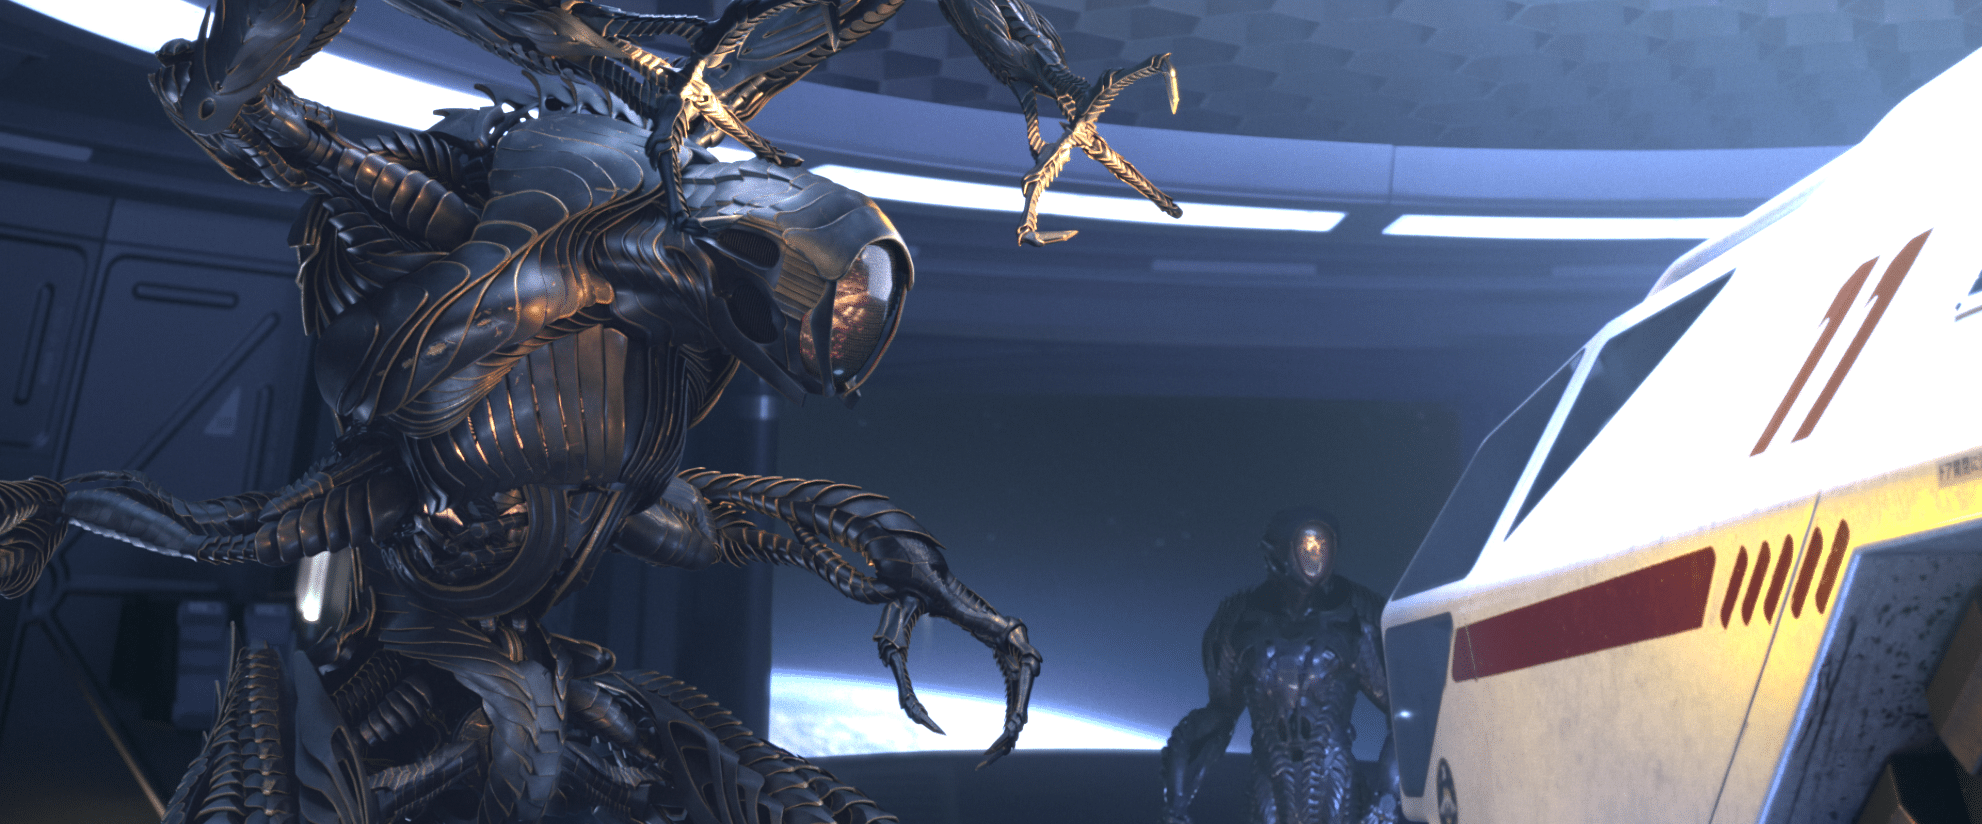 RTX Server Showcase Uses Assets from Lost in Space | NVIDIA Blog